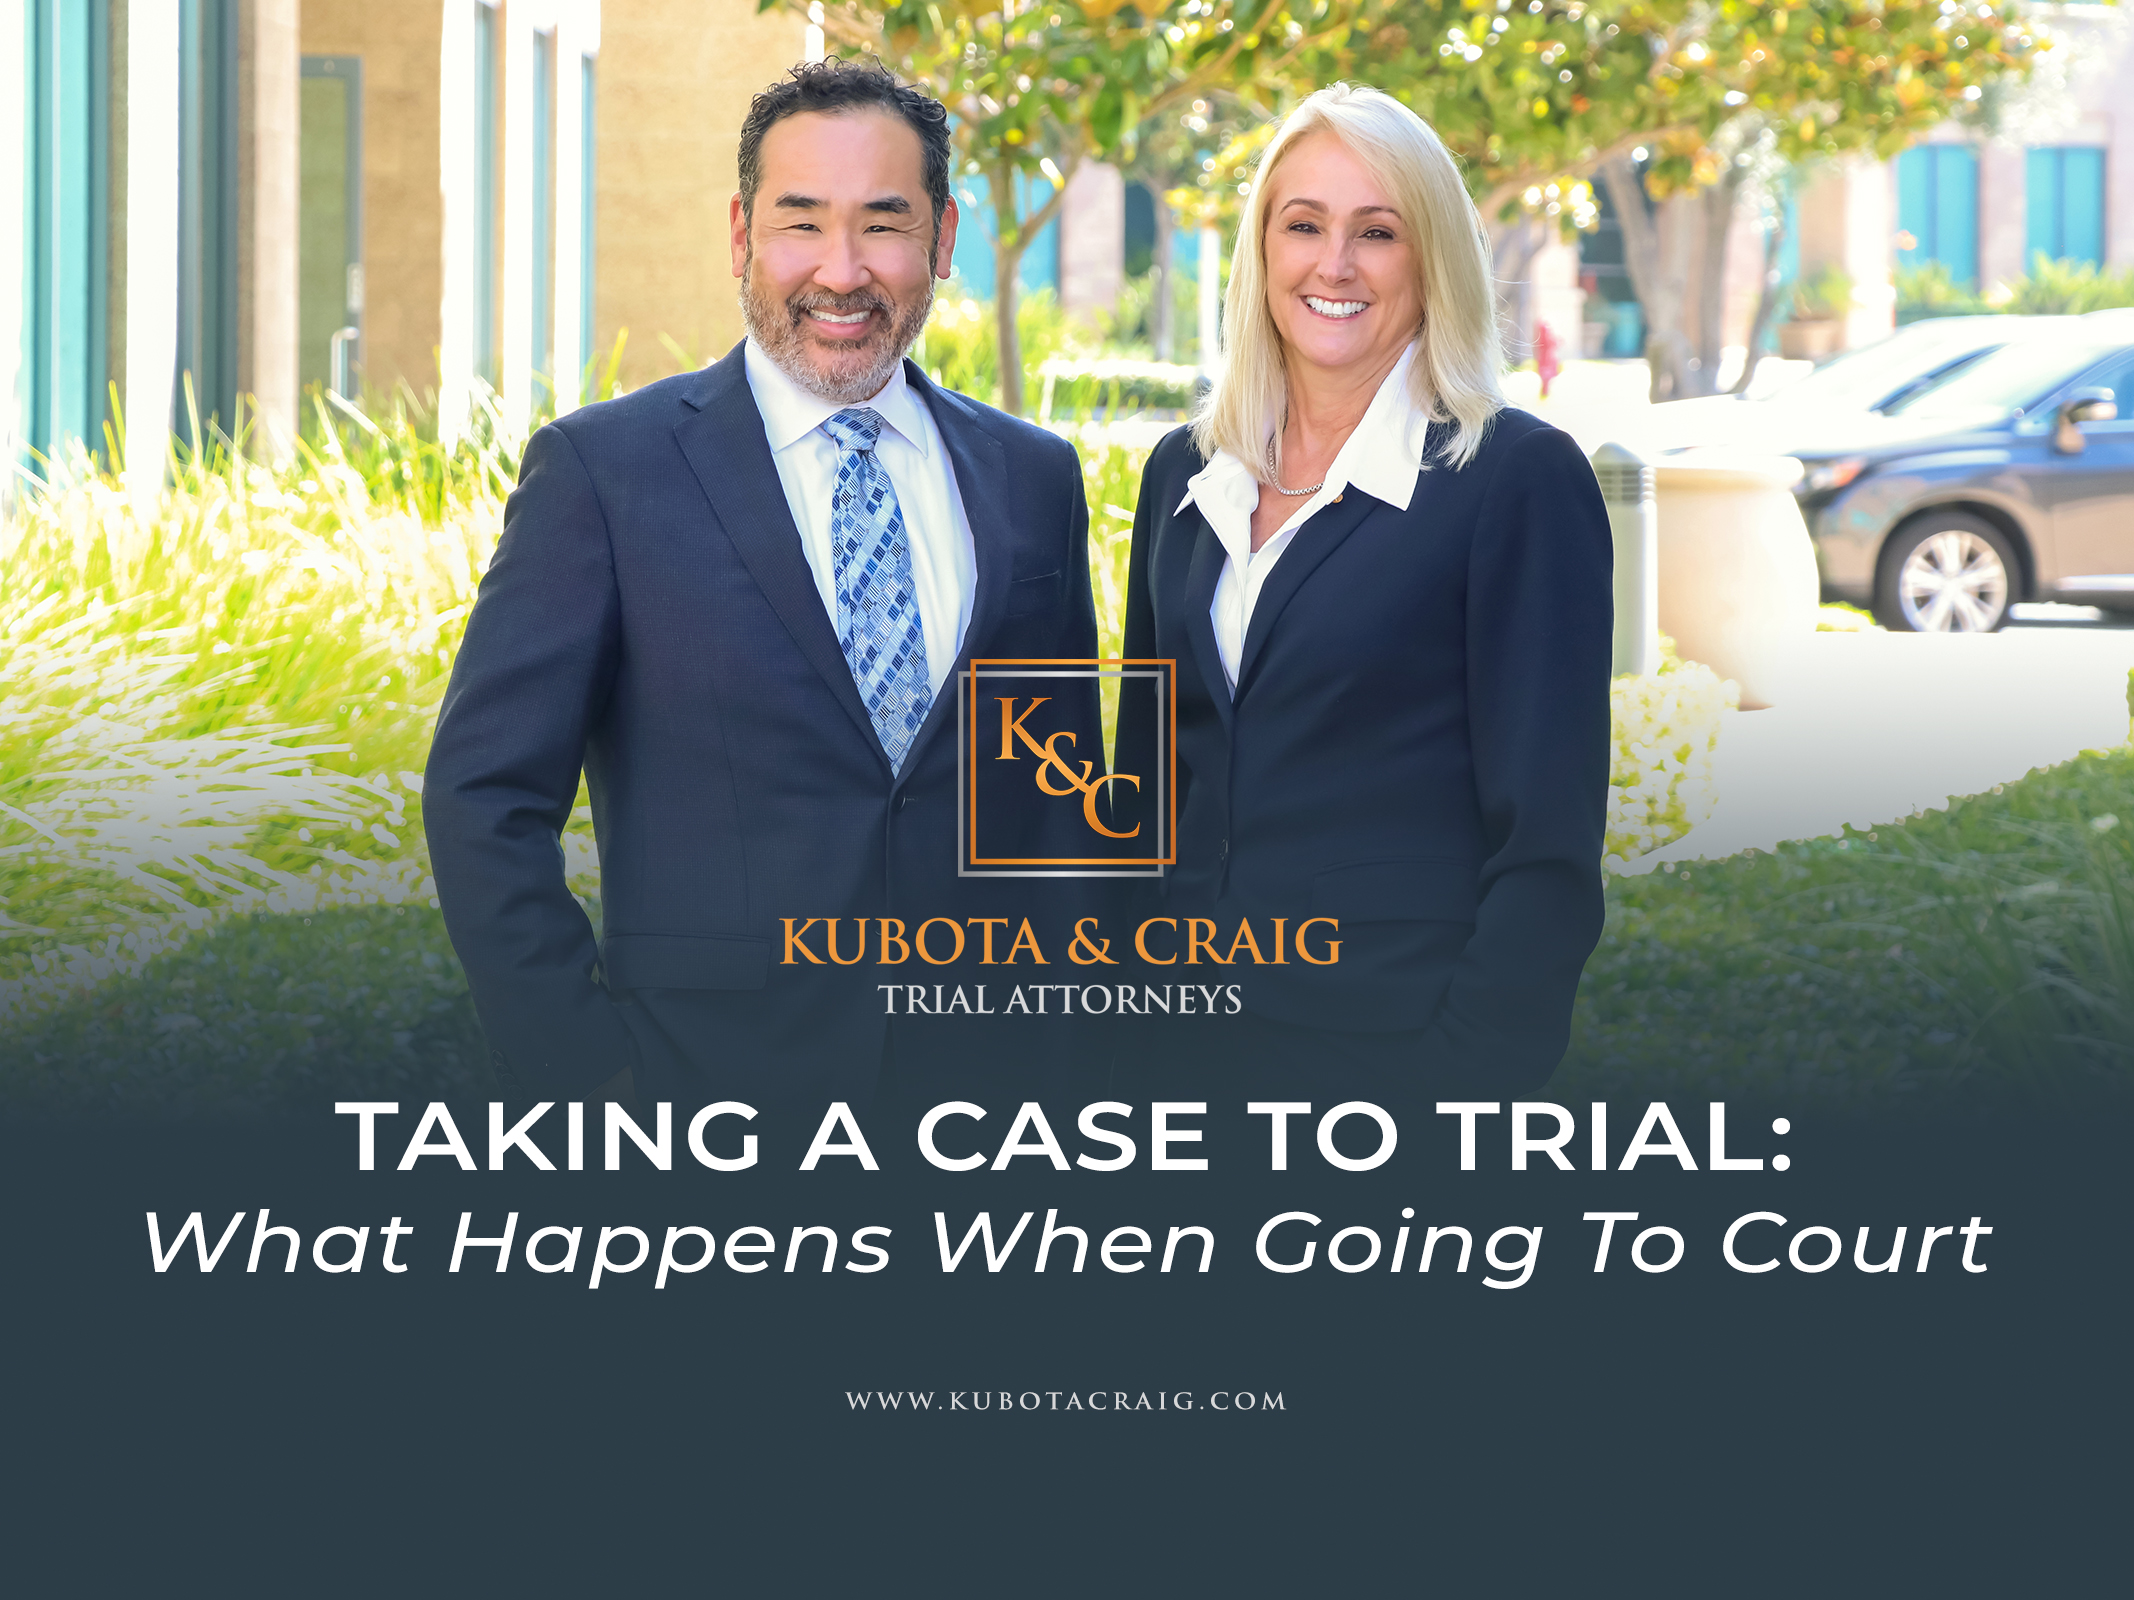 Taking a case to trial: what happens when a case goes to court